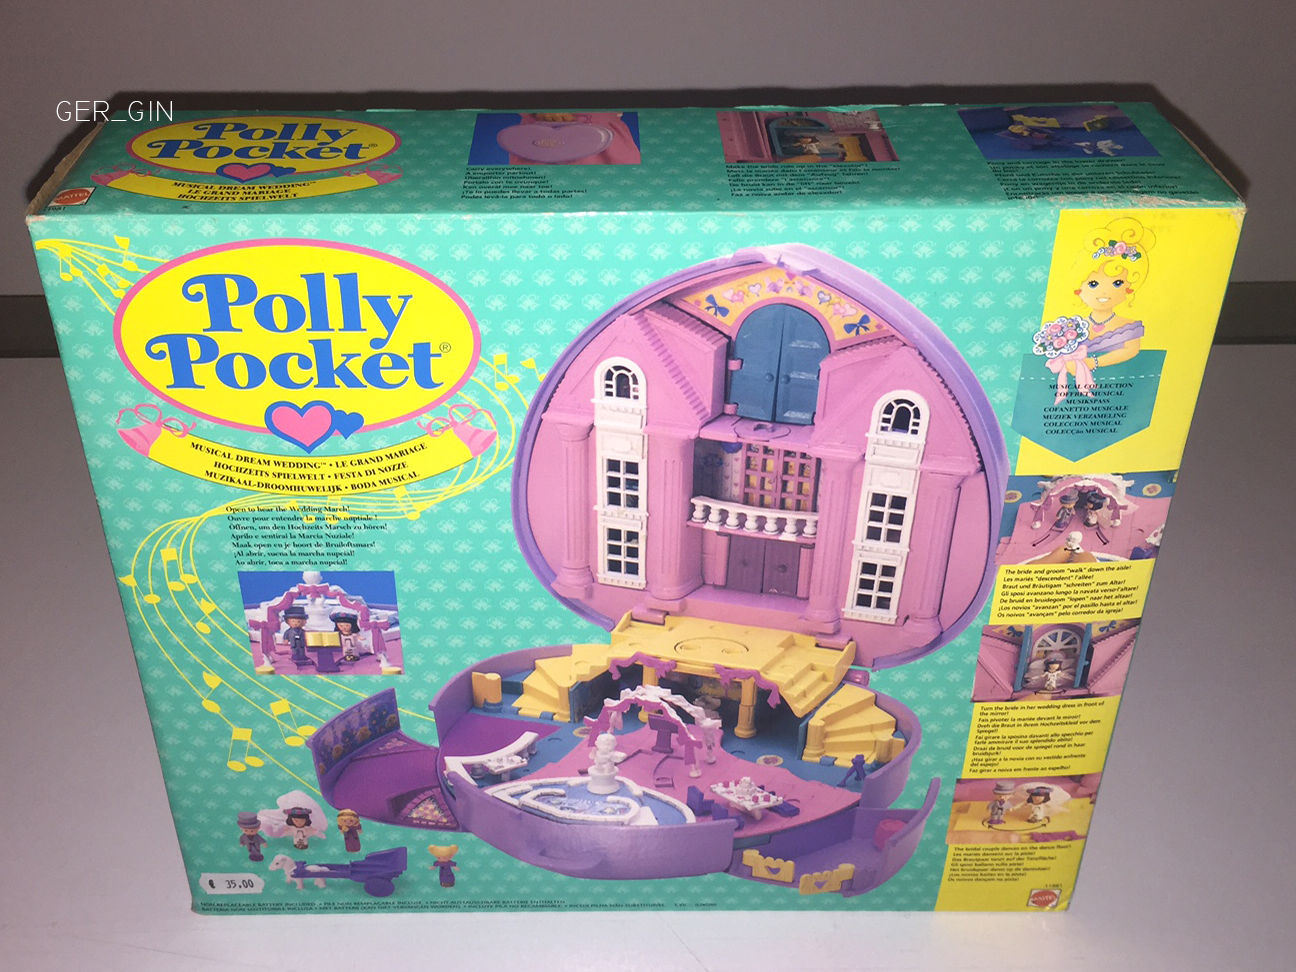 Your Old Polly Pocket Sets Could Be Worth Hundreds Of Dollars